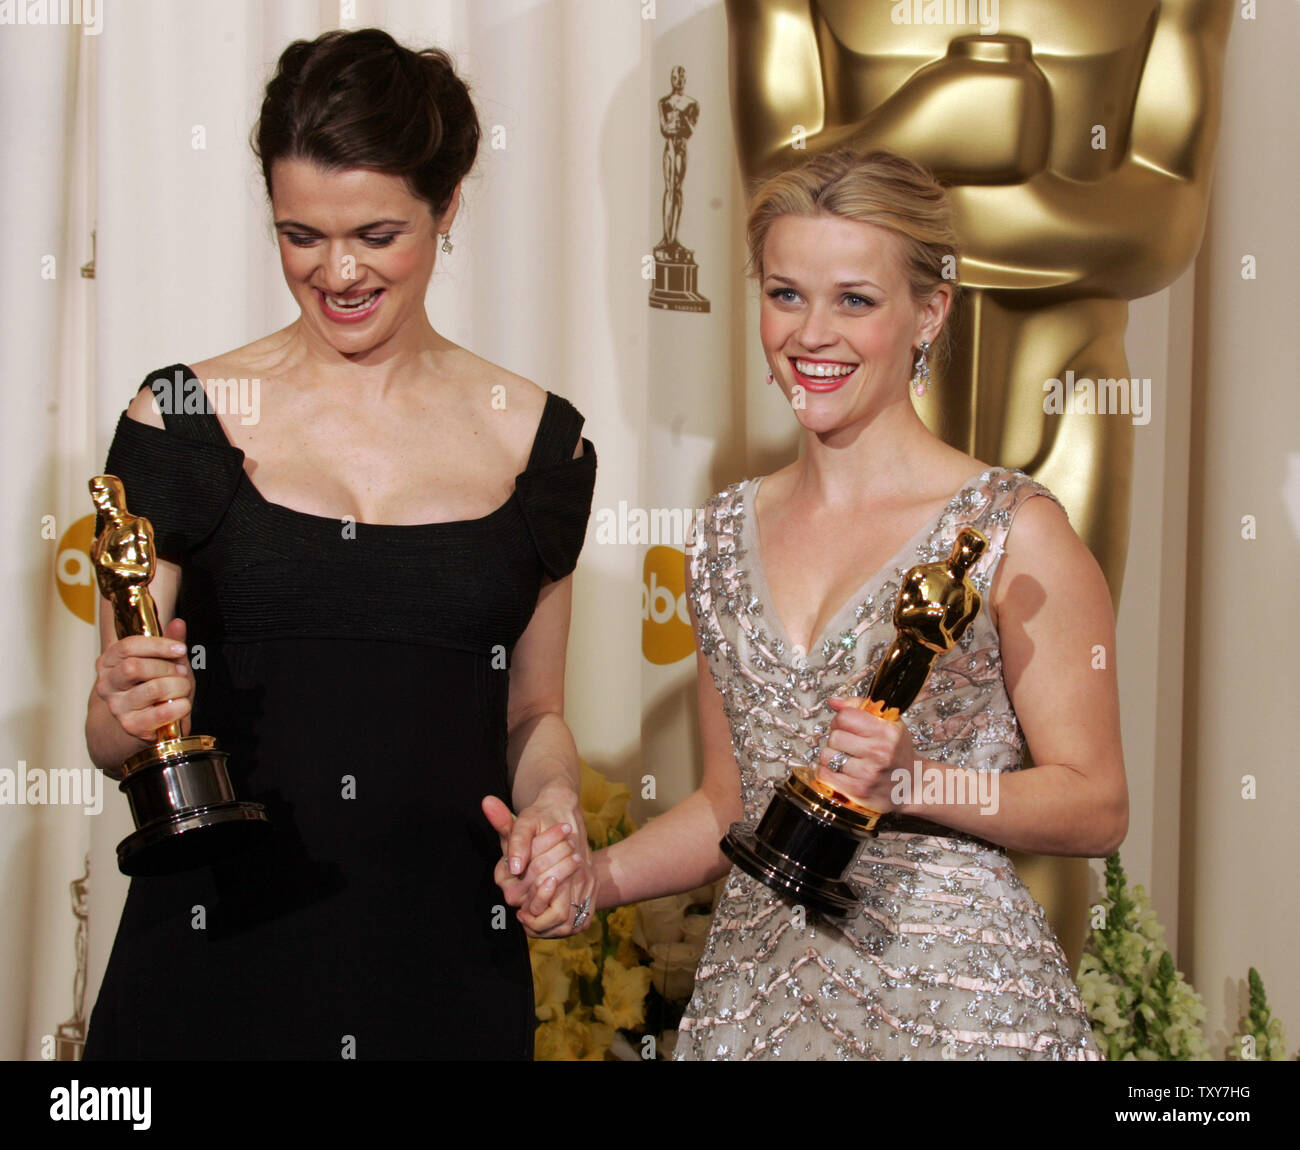 Reese Witherspoon (R) poses with her best actress Oscar for 'Walk the Line' along with Rachel Weisz and her Oscar for best supporting actress for 'Constant Gardener' at the 78th Annual Academy Awards at the Kodak Theatre in Hollywood, Ca., on March 5, 2006.   (UPI Photo/Gary C. Caskey) Stock Photo